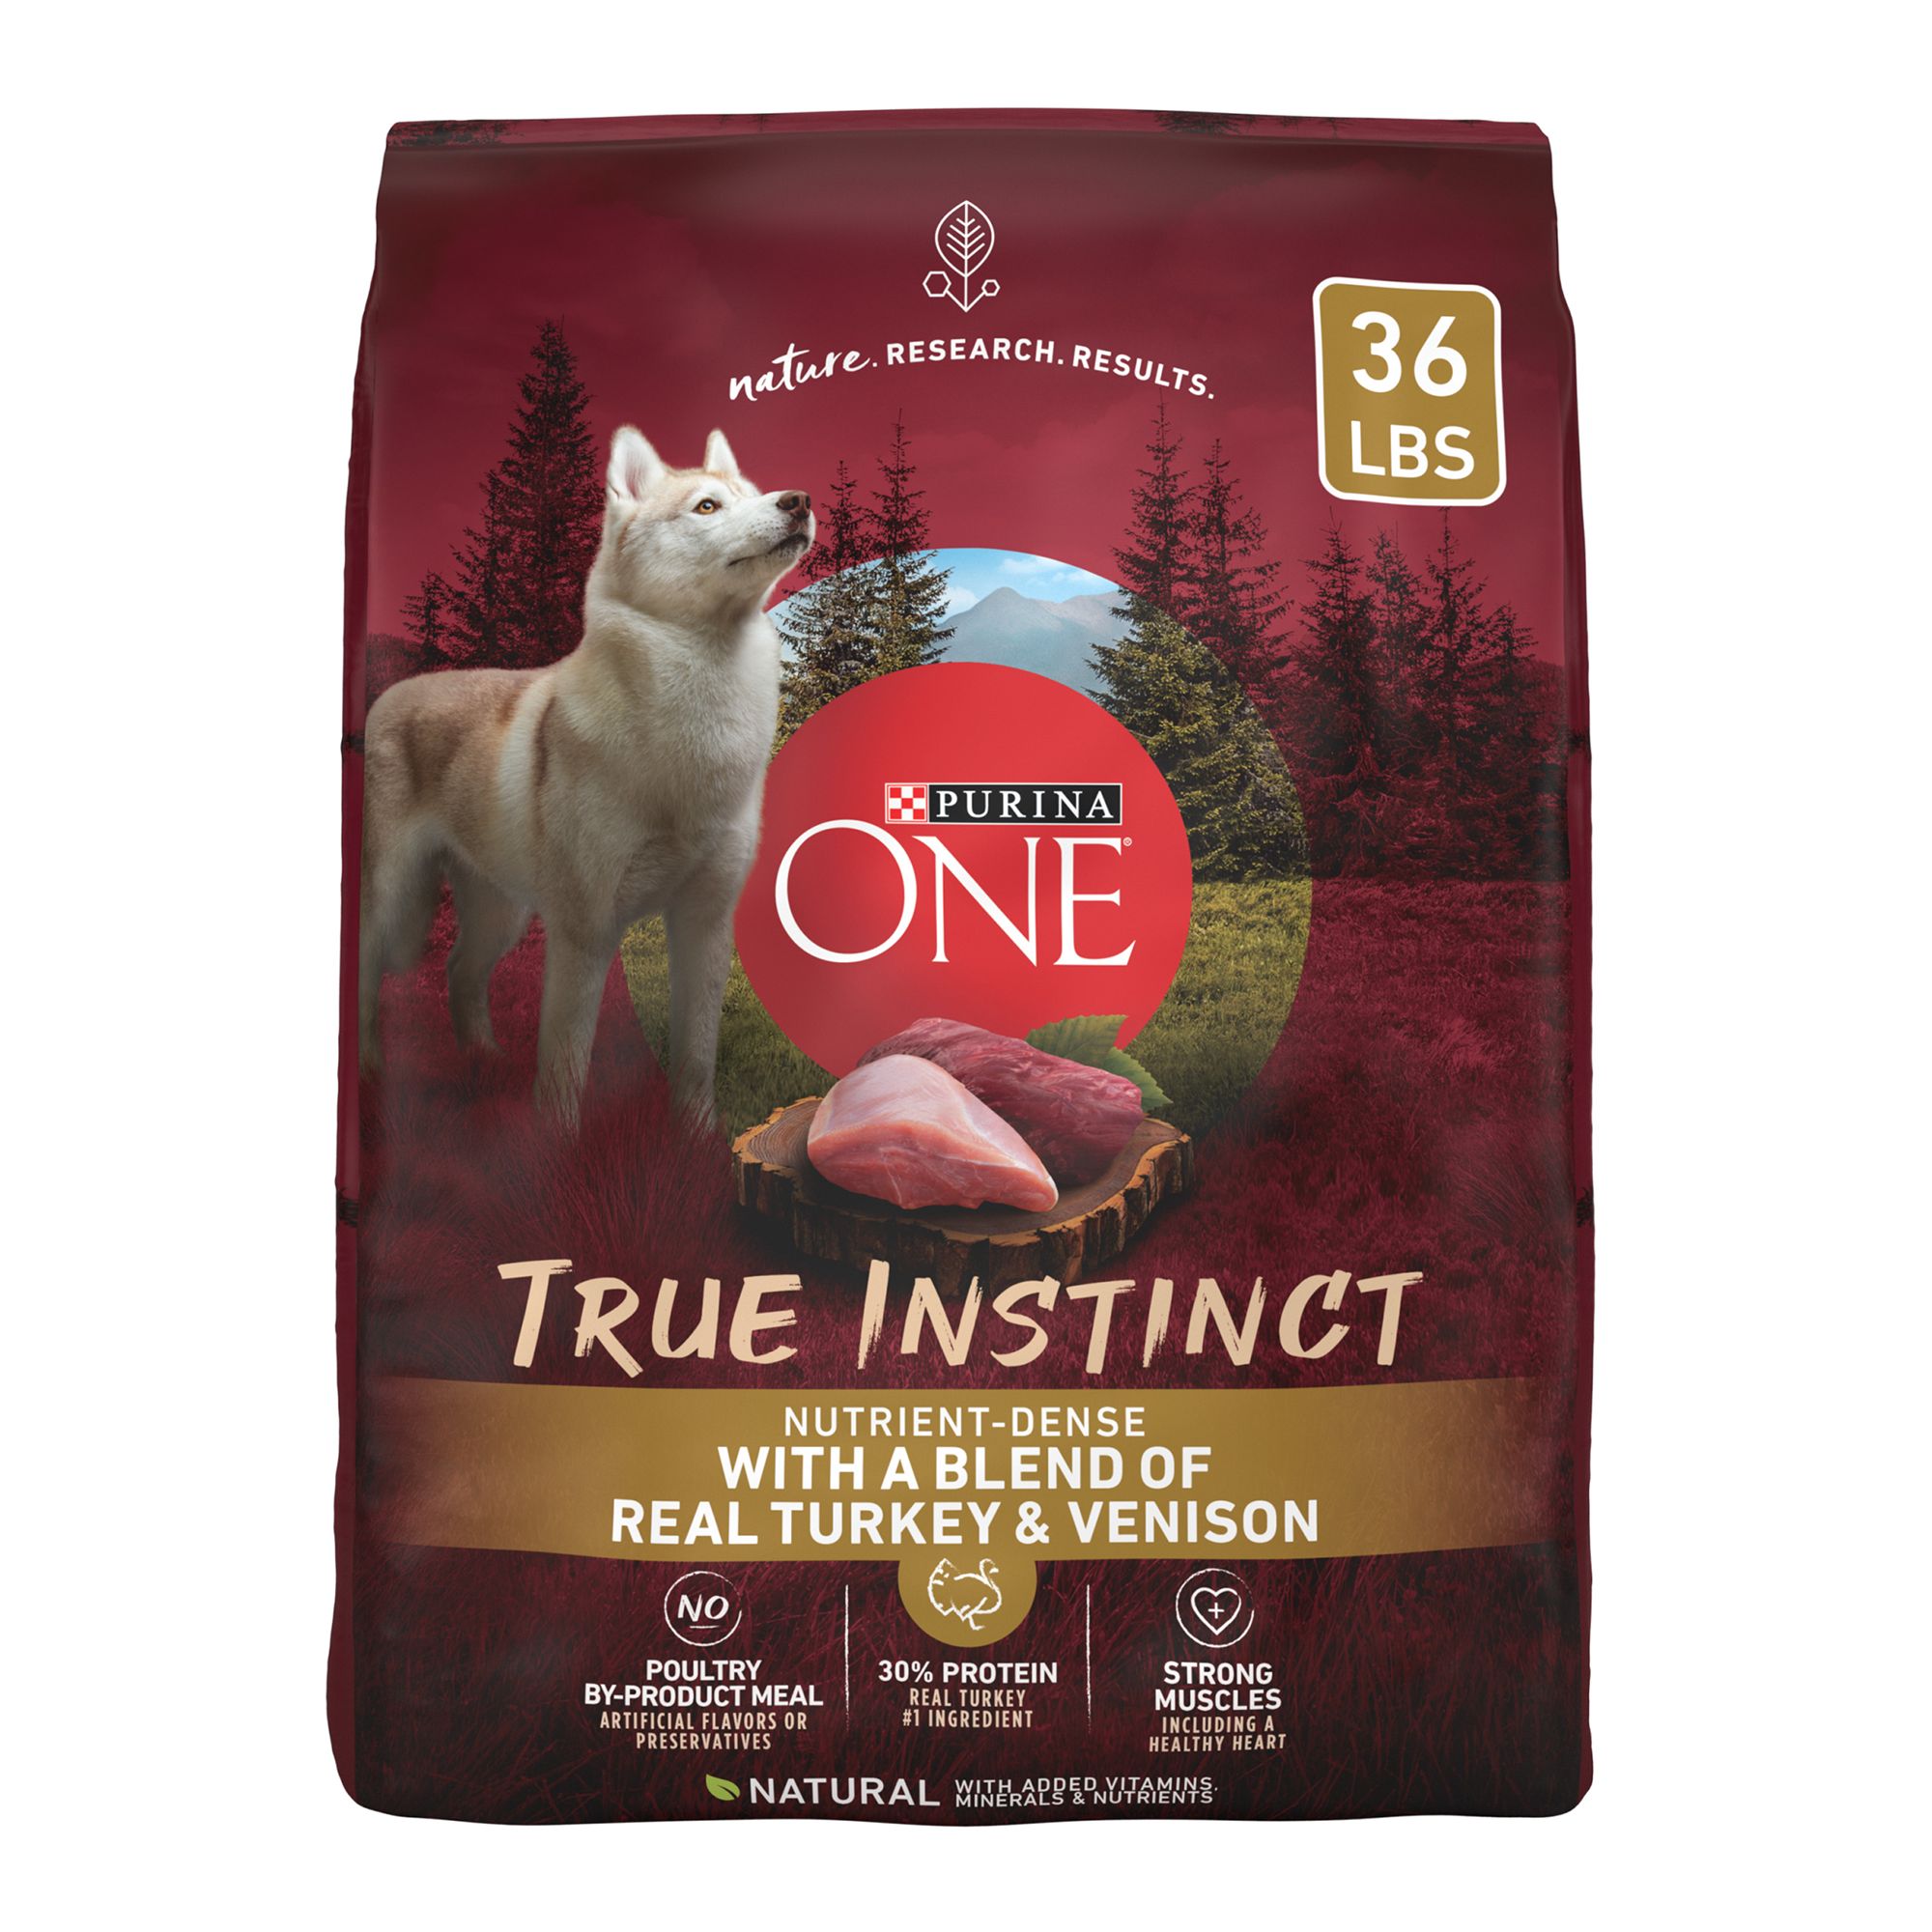 Purina ONE True Instinct food for dogs